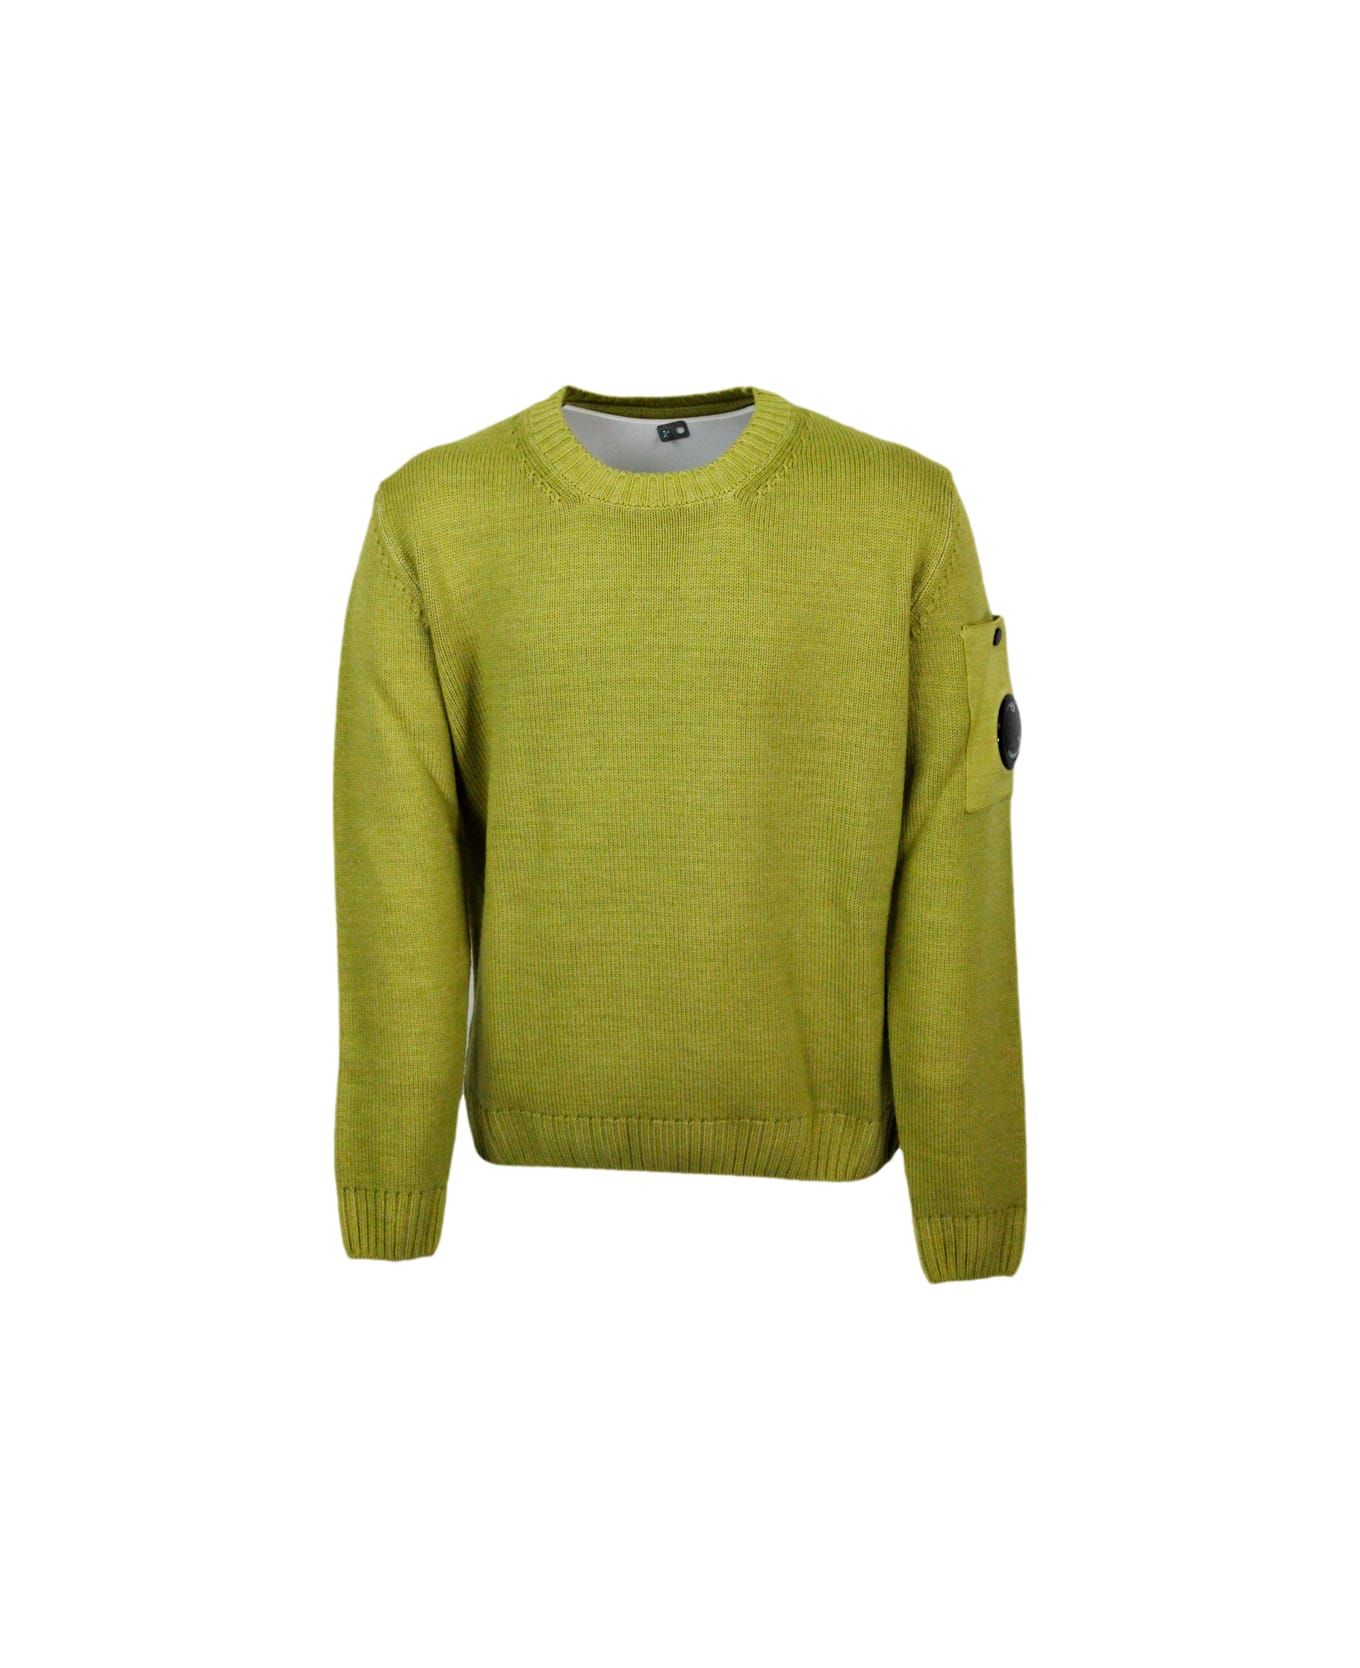 C.P. Company Crewneck Wool Sweater With Logo On The Sleeve In Vanisè Color - Lime ニットウェア＆スウェットシャツ